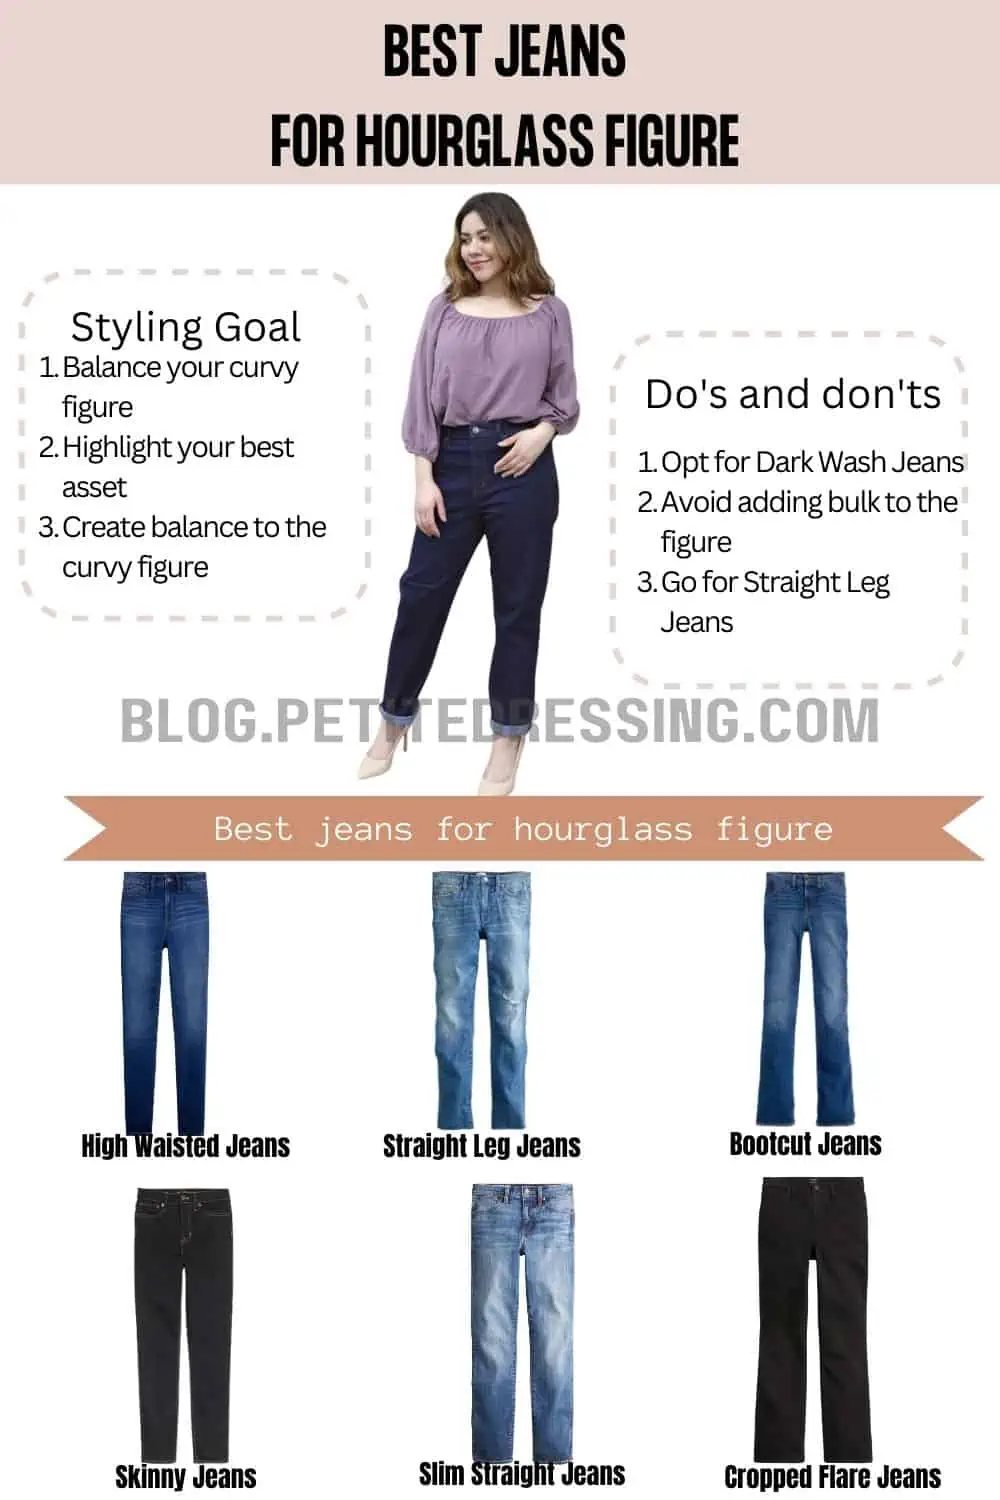 The Complete Pants Guide for Hourglass Body Shape